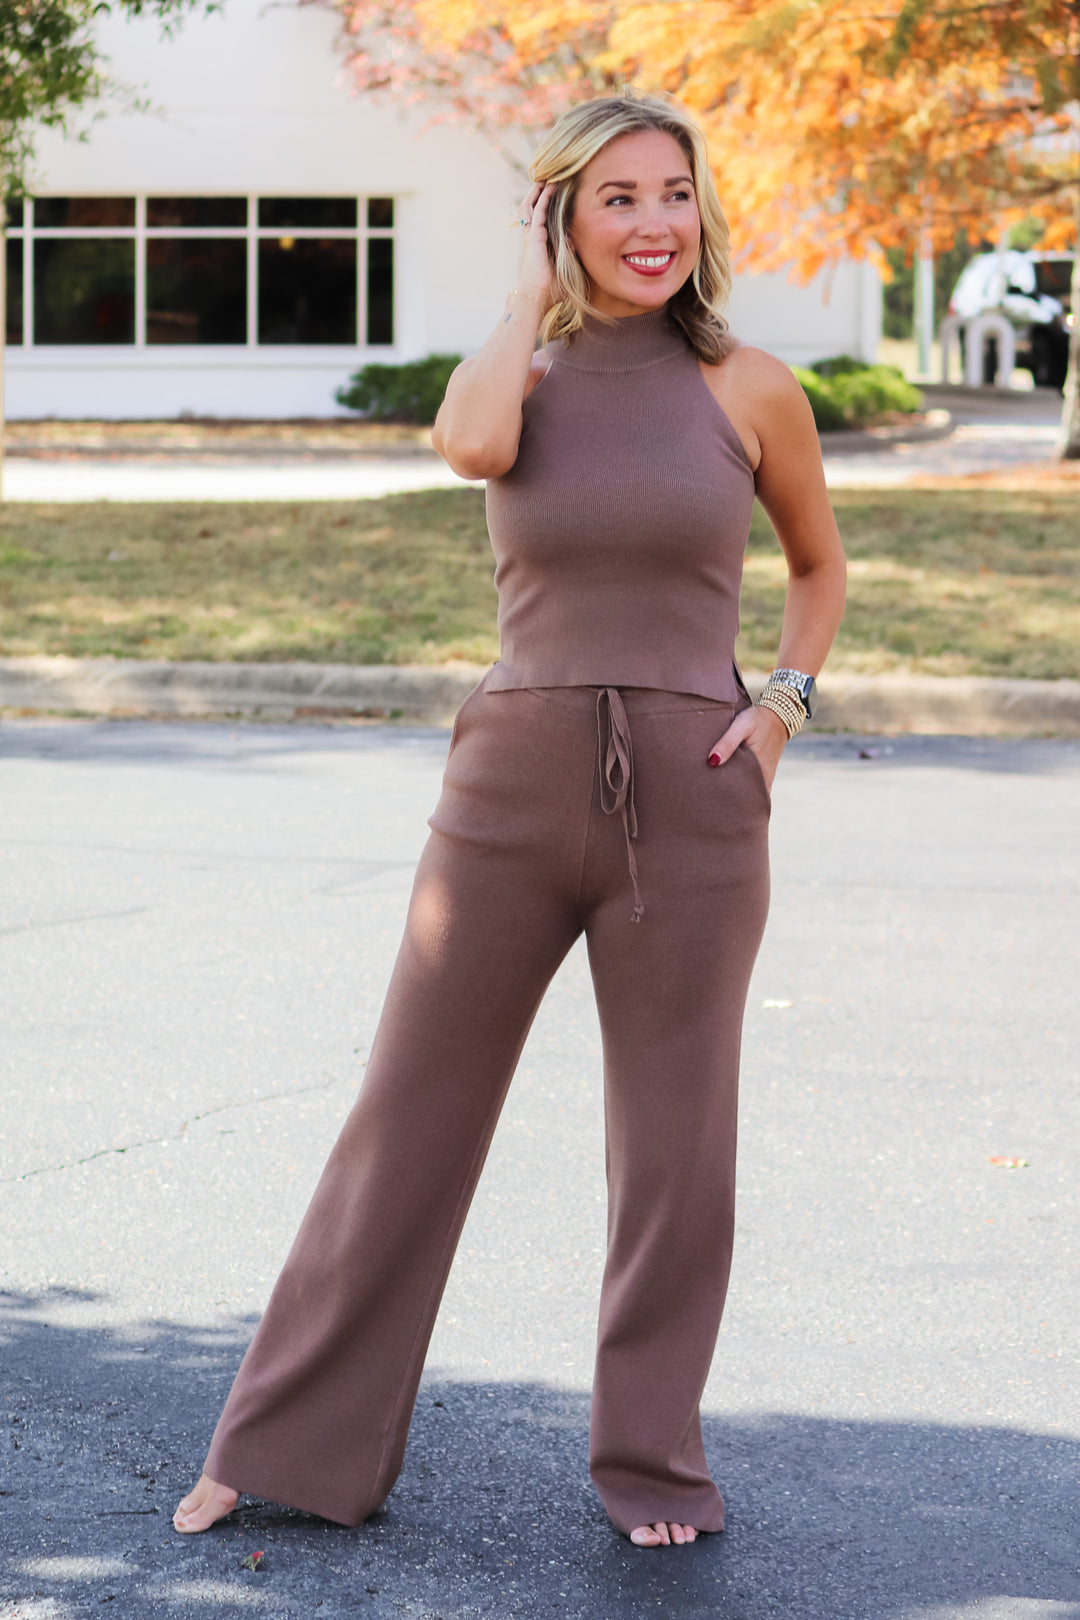 Wide Leg Pants - Taupe – Ivy House Boutique